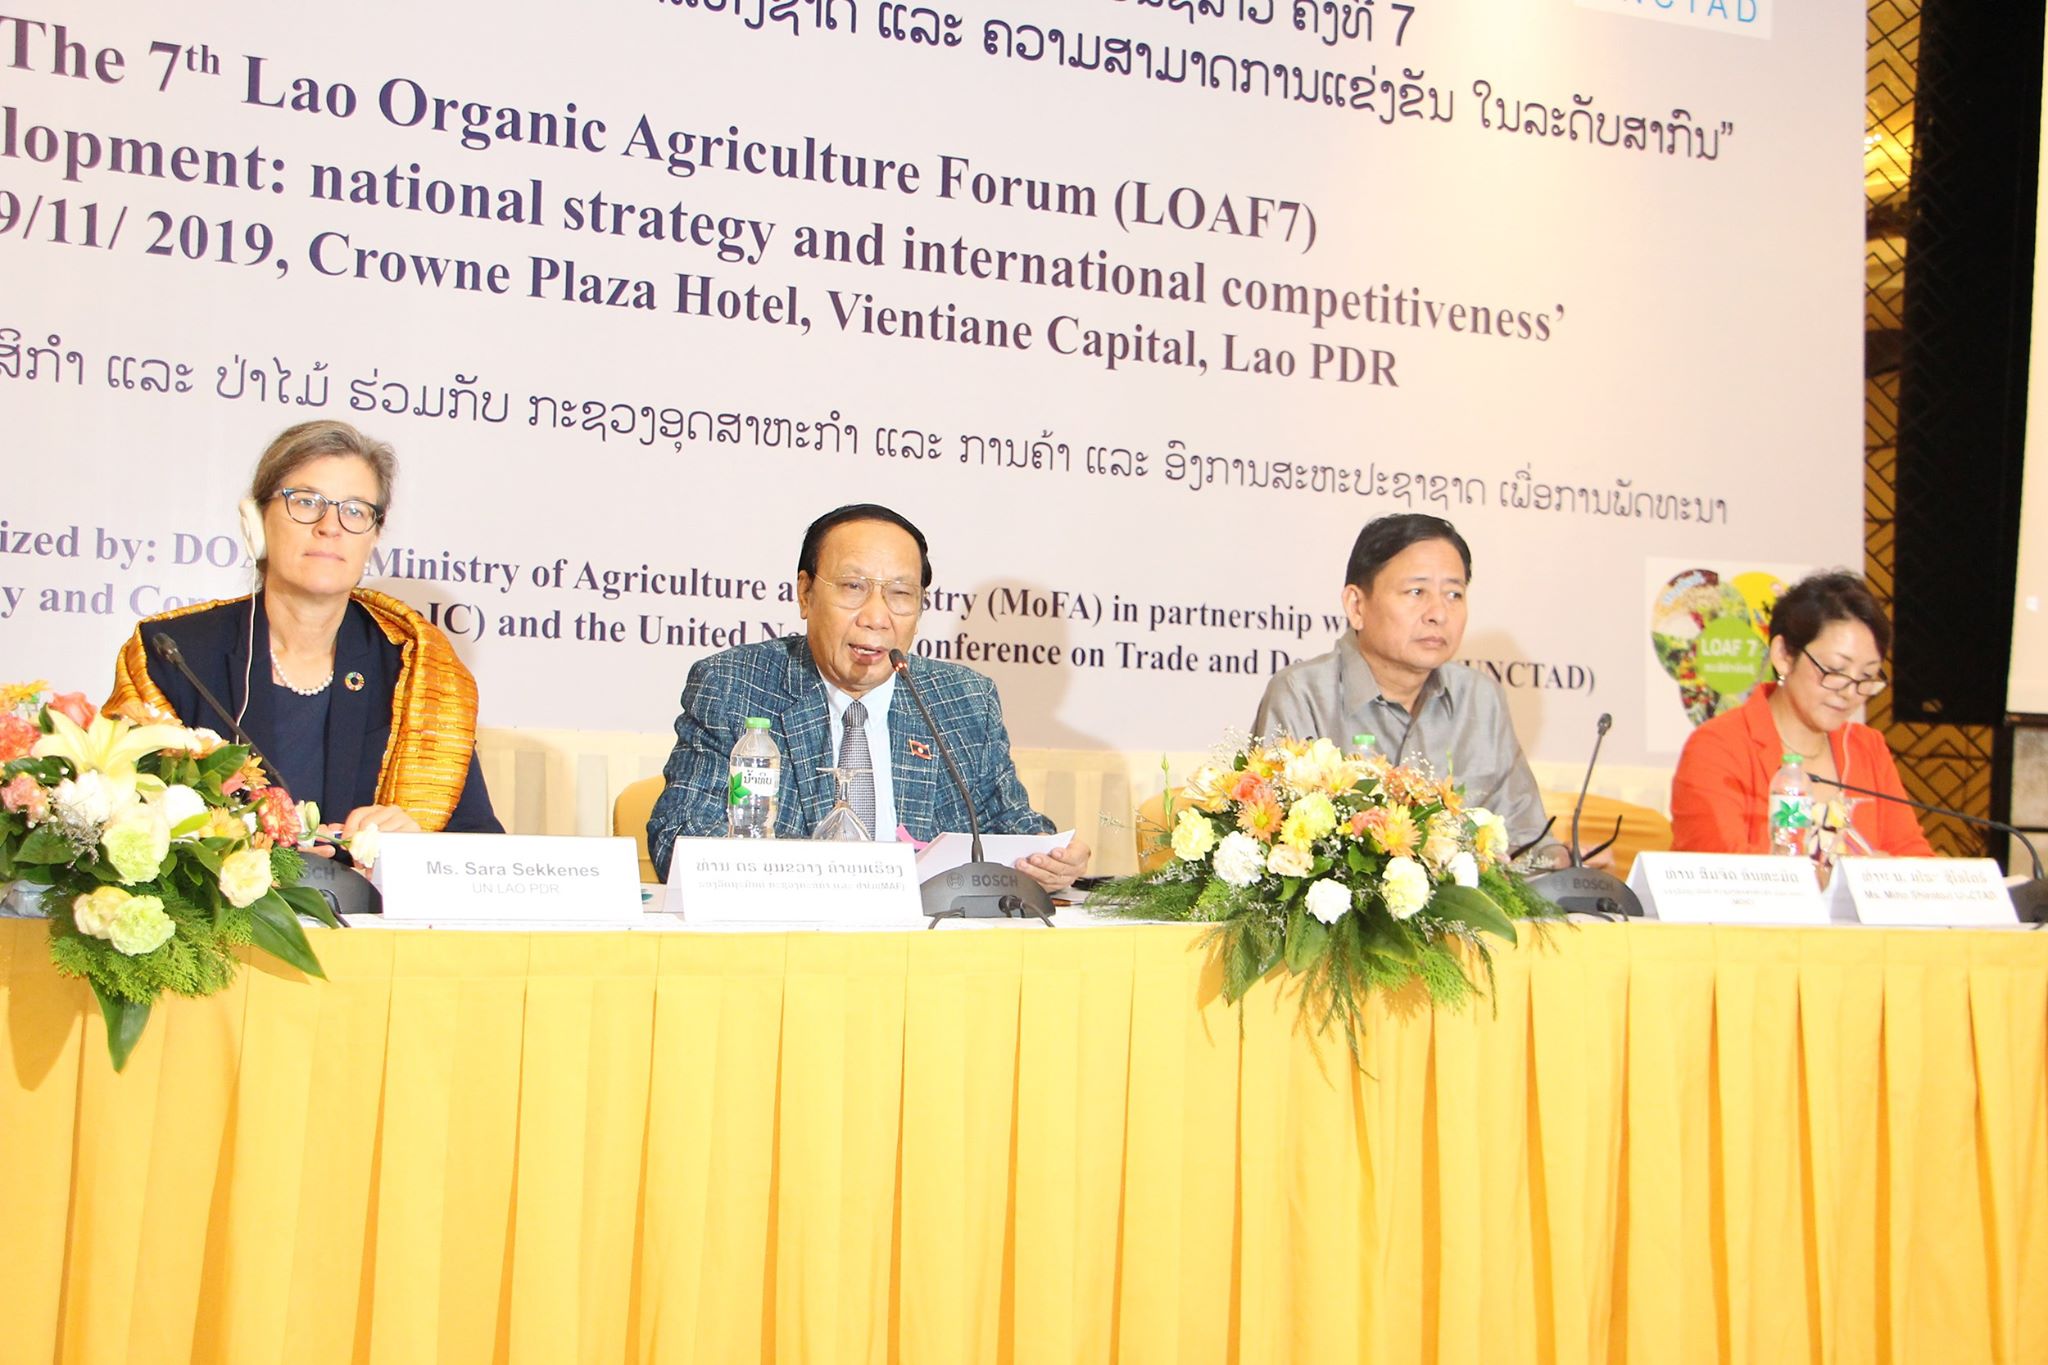 Laos eyes upgrade of organic agriculture to build trade competitiveness